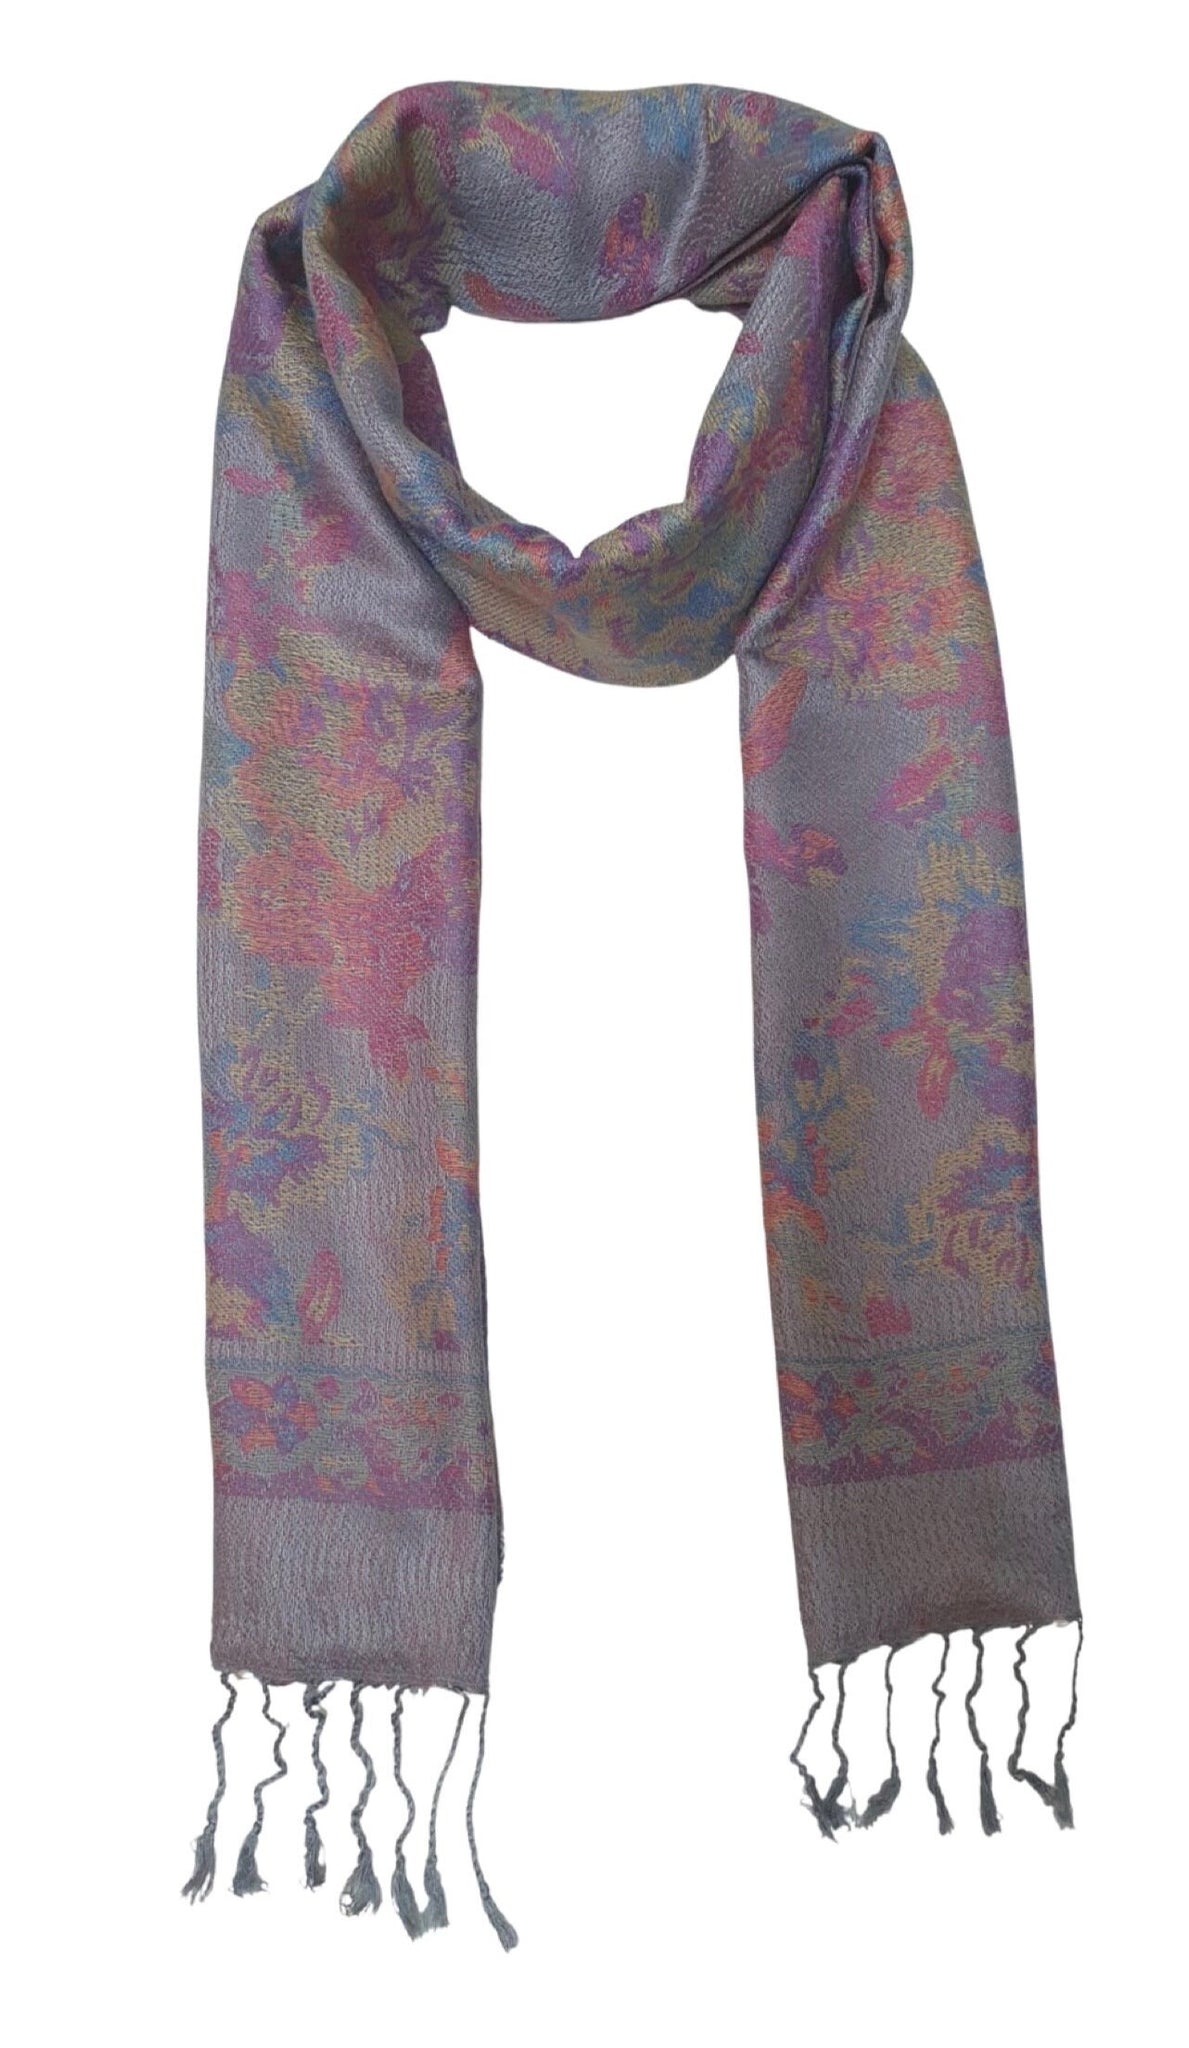 Mosaic Weave Pashmina Style Scarf Shawl for Women - Soft and Luxurious